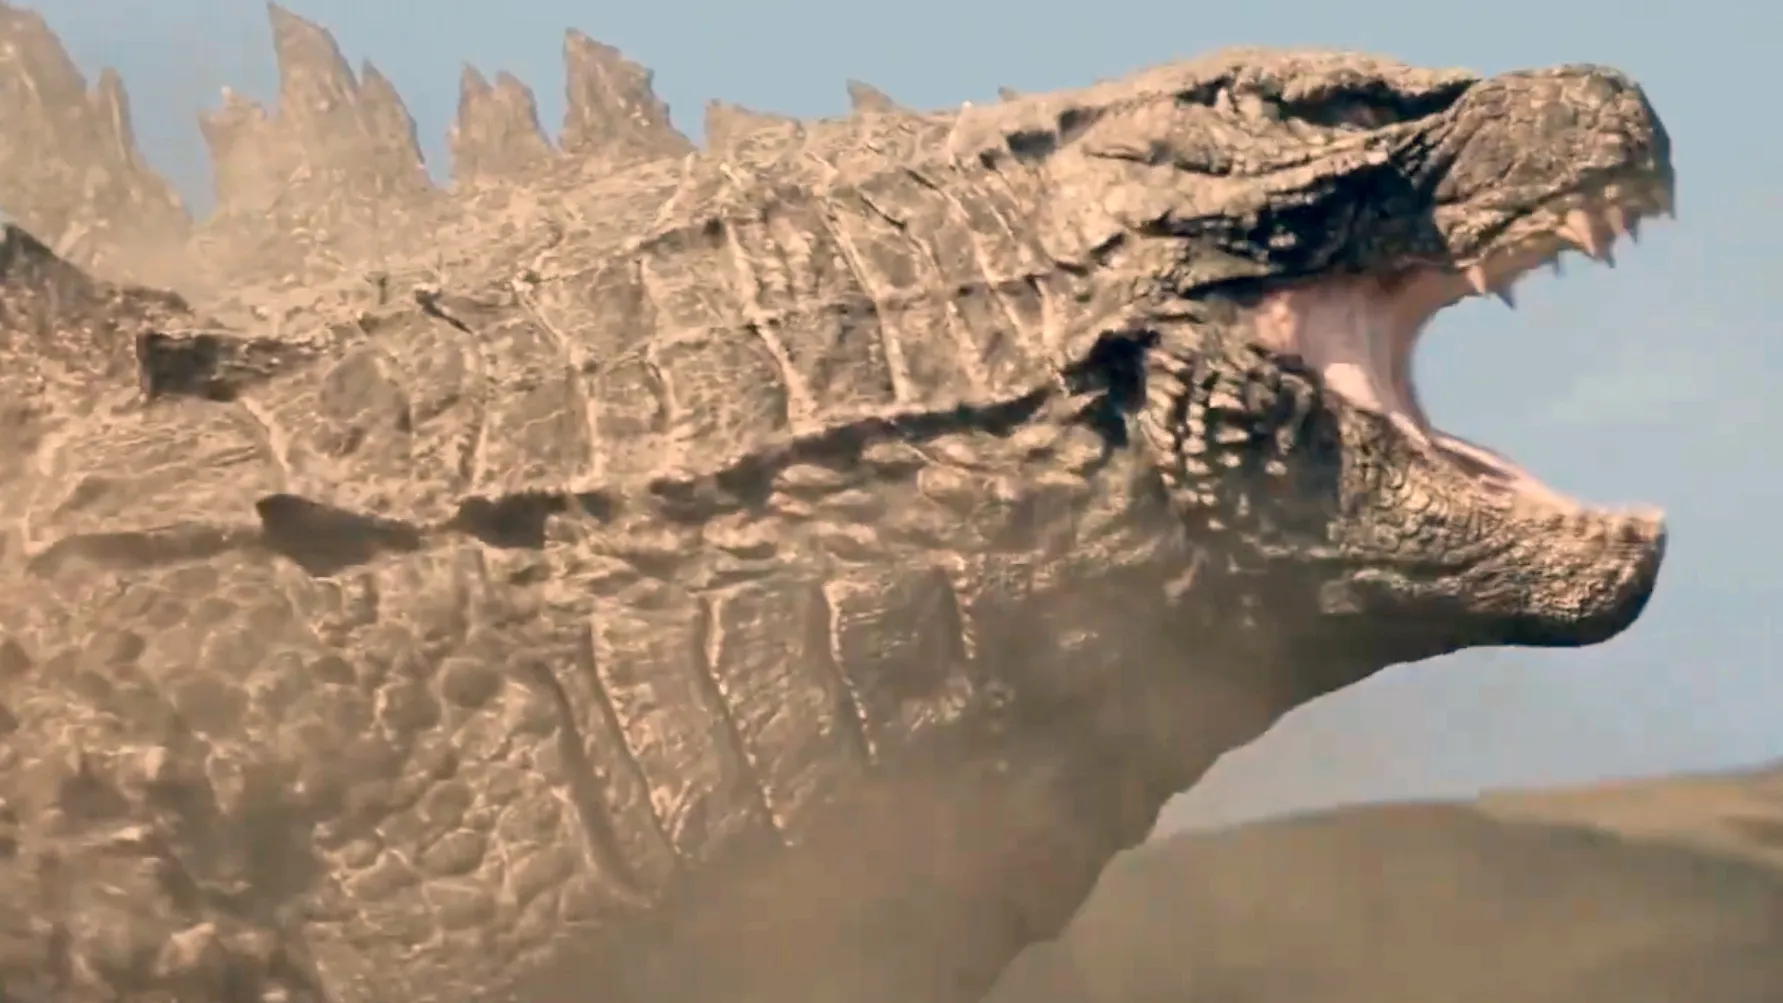 Apple TV's Godzilla Will Feature New and Old Kaiju Monsters